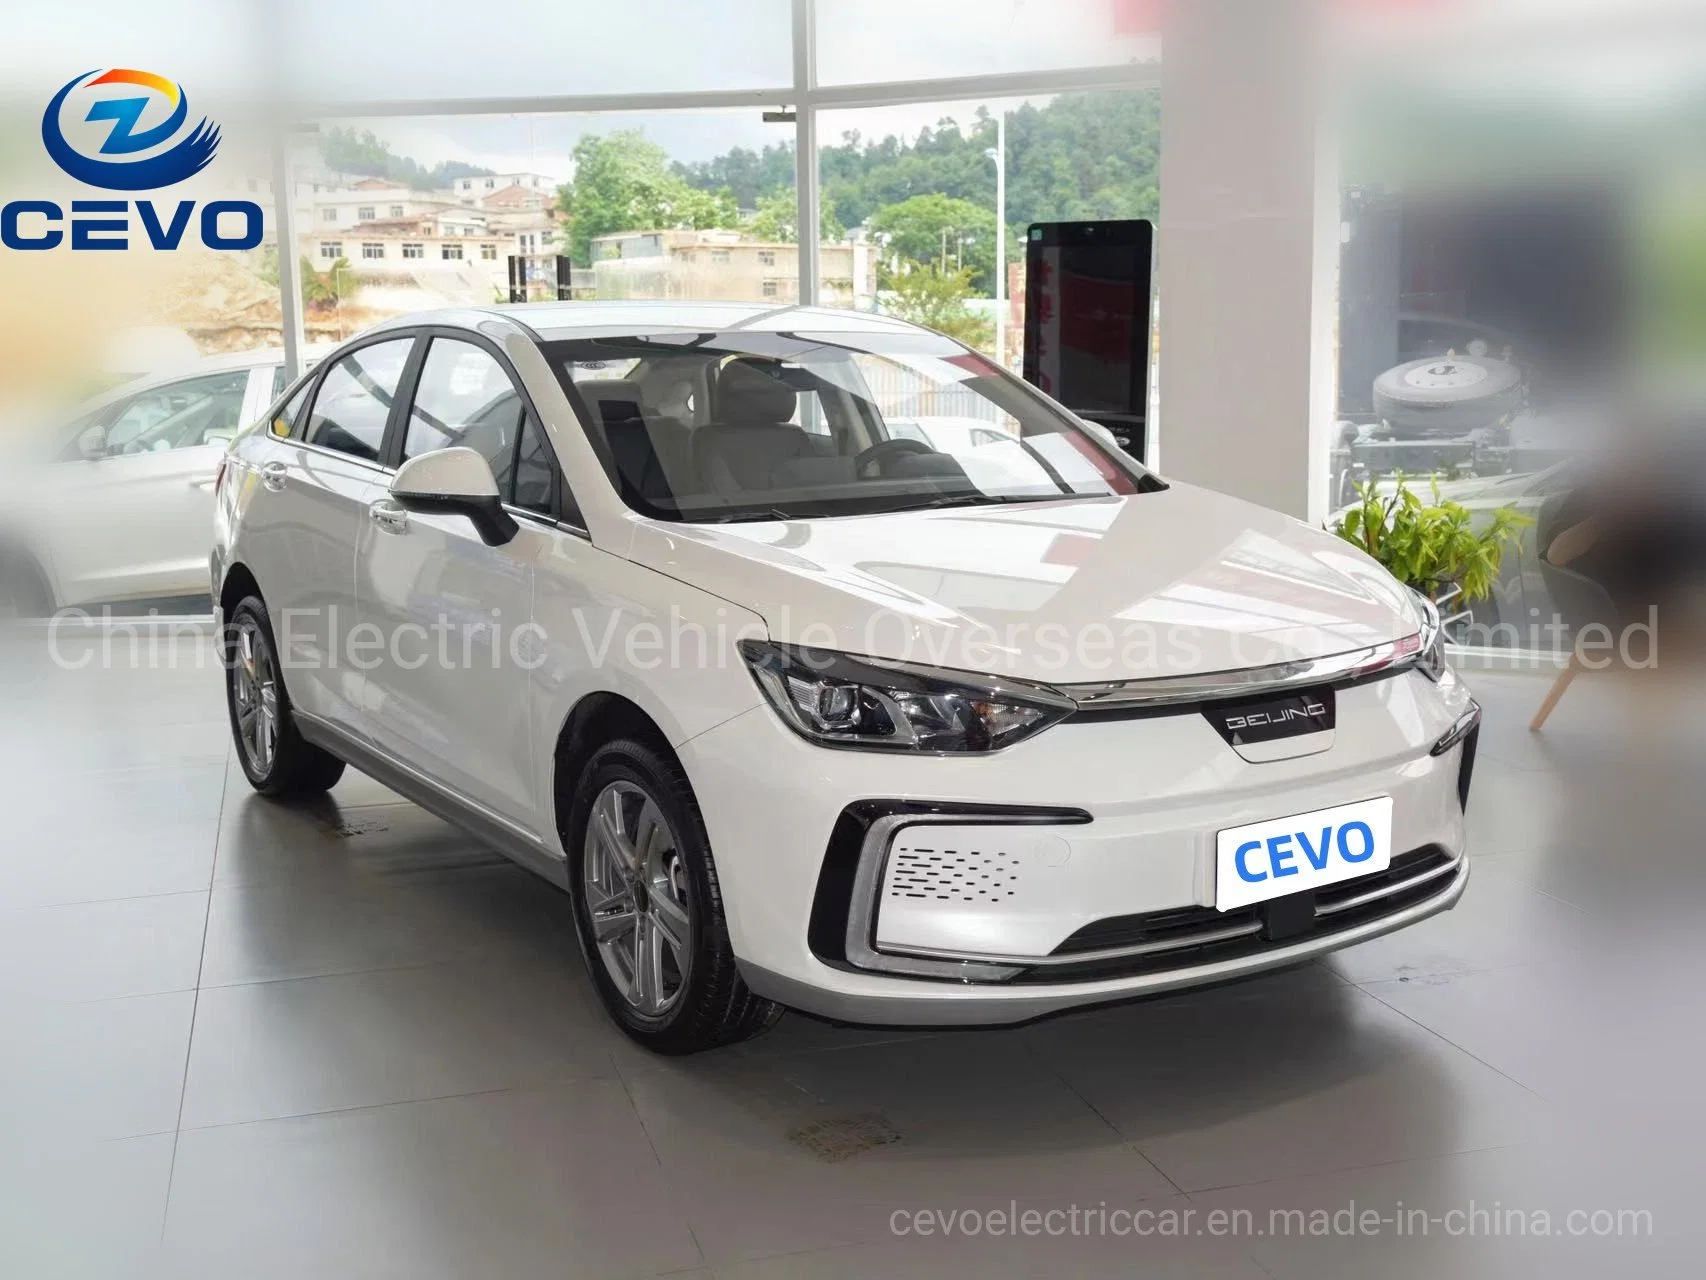 Best Smart Condirtion High Speed High Long Battery Life China Electric Vehicle Best Affordable Low Cost Cheapest EV Sedan Mini Bjev EU5 Electric Car for Sale